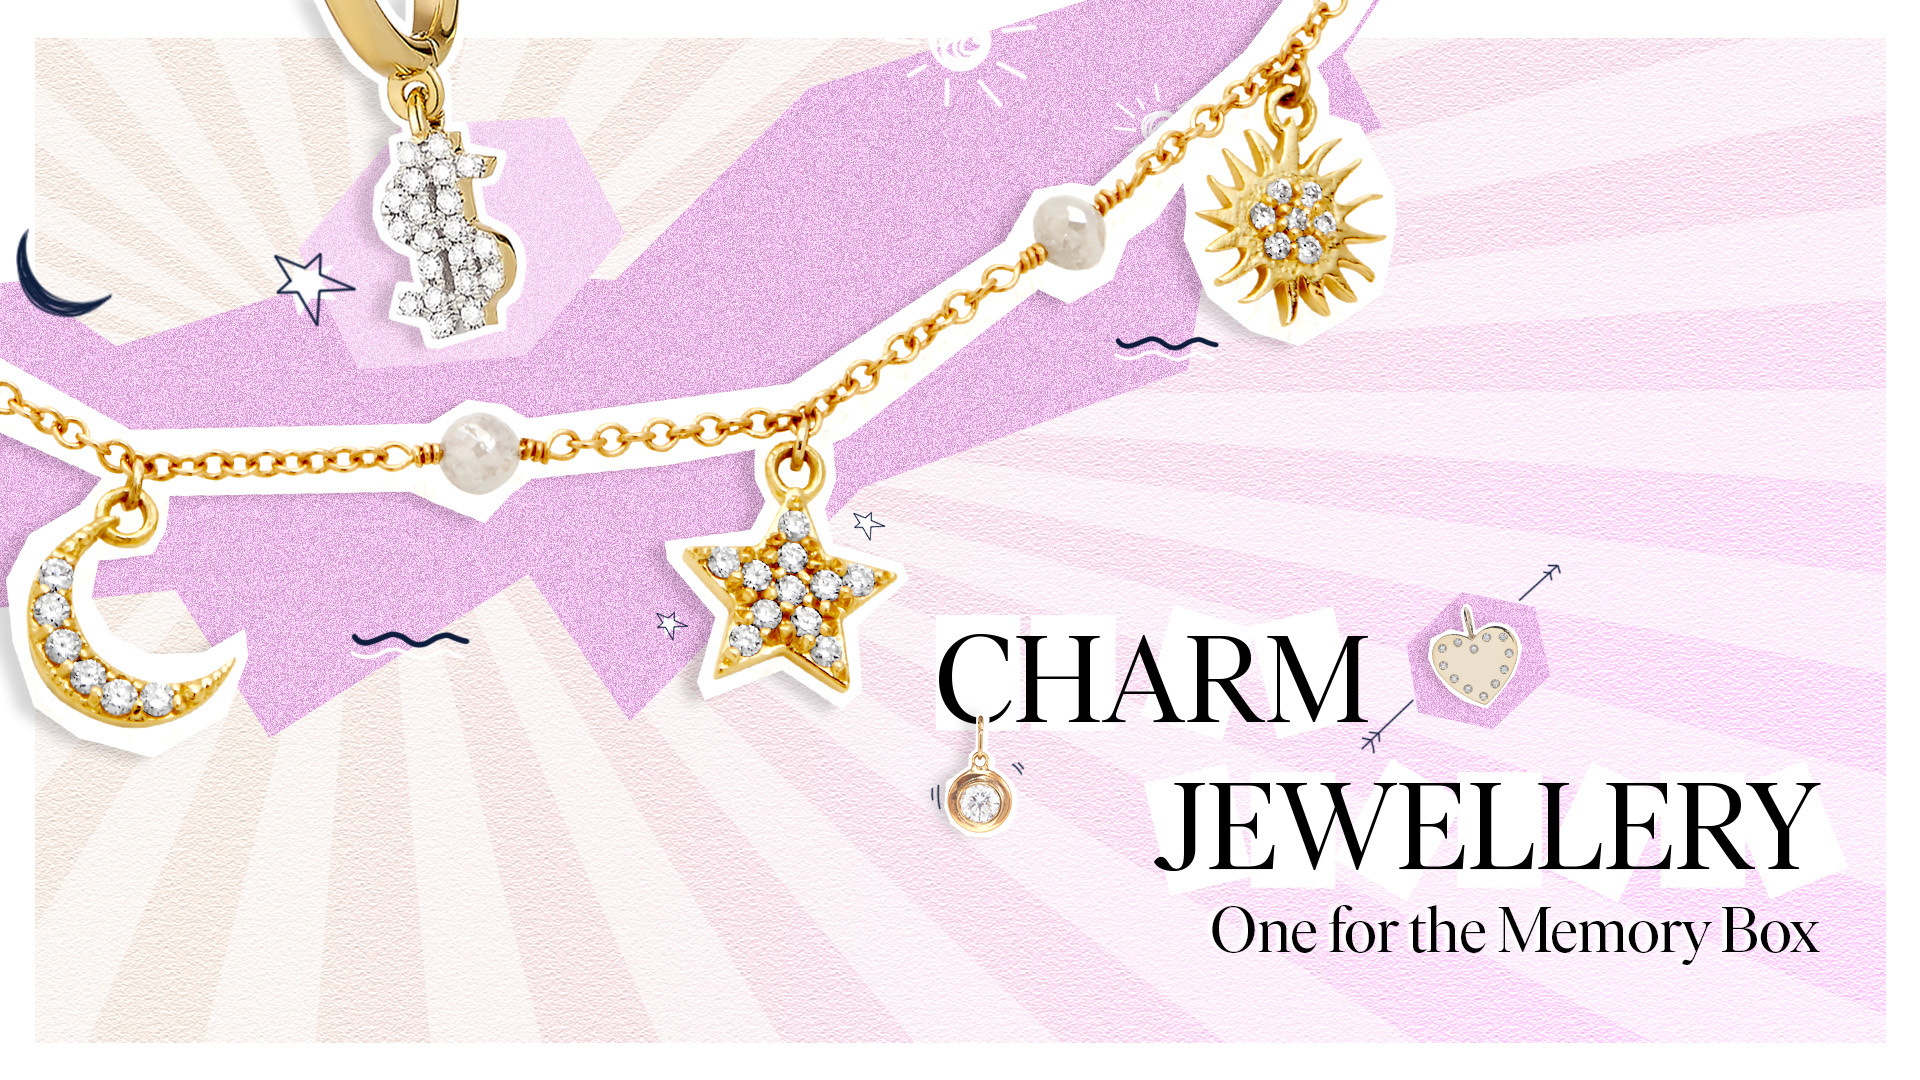 Assortment of diamond charms for your necklaces, bracelets, and earrings